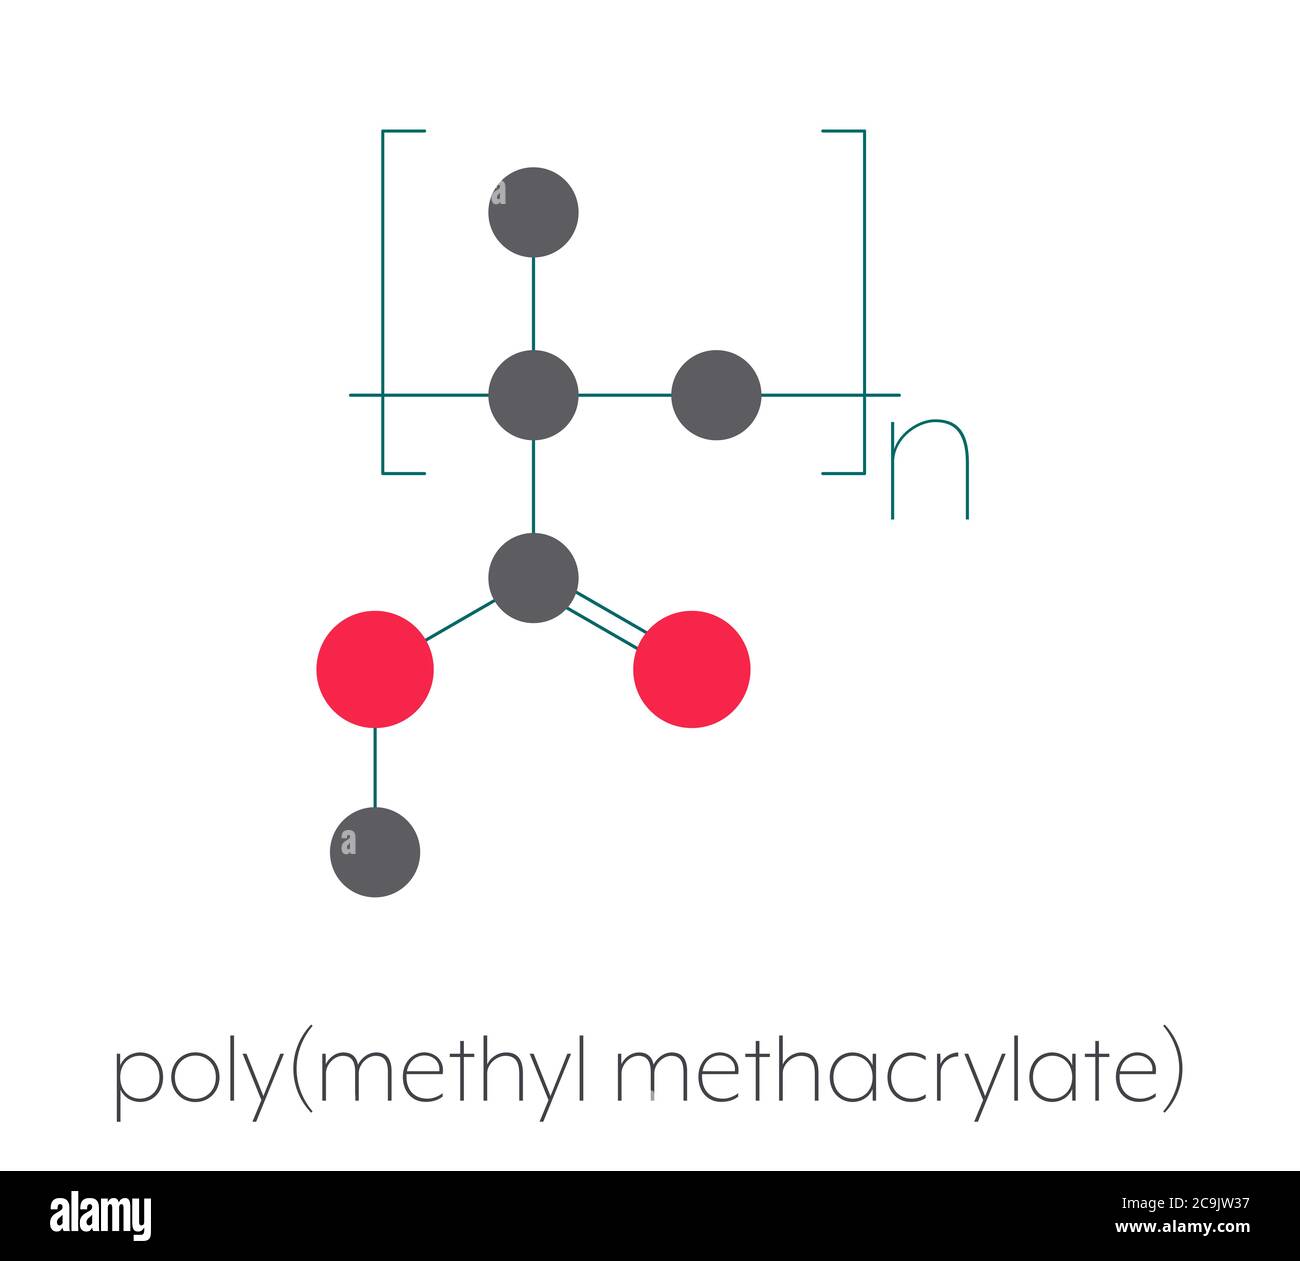 Acrylic glass or poly(methyl methacrylate), chemical structure. PMMA is the component of acrylic paint (latex) and acrylic glass. Stylized skeletal fo Stock Photo